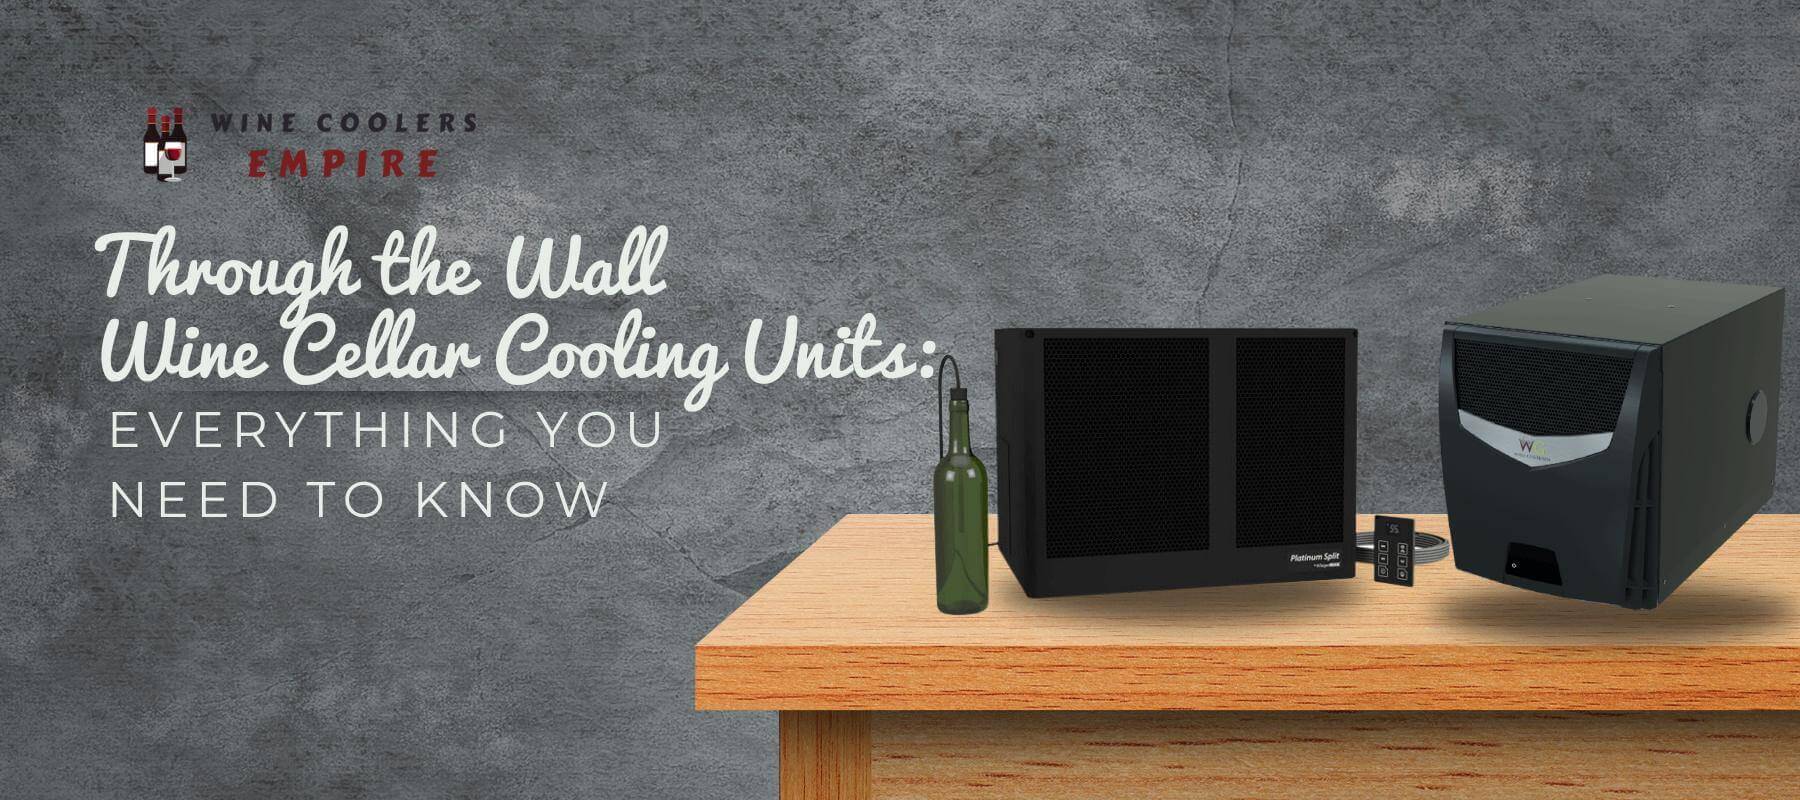 Through the Wall Wine Cellar Cooling Units: Everything You Need To Know